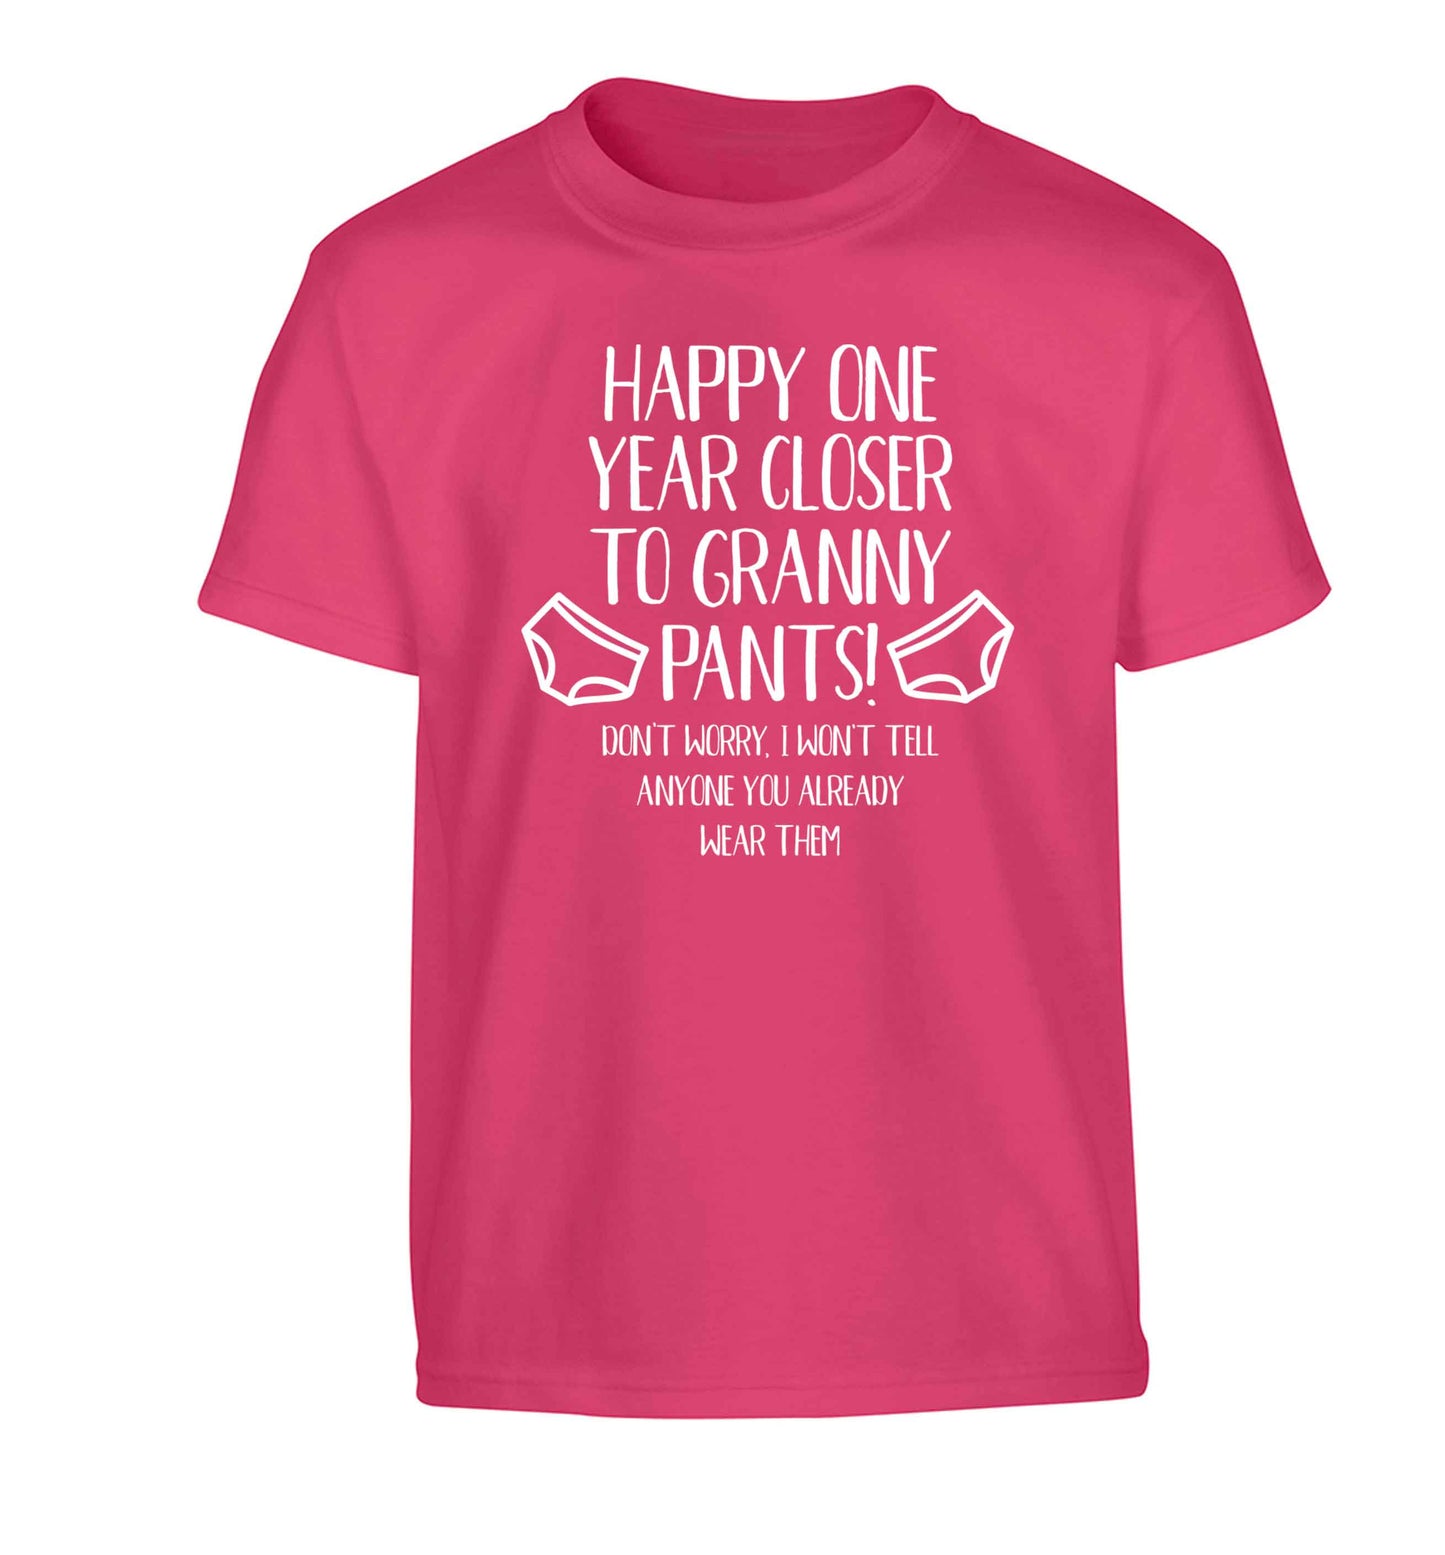 Happy one year closer to granny pants Children's pink Tshirt 12-13 Years